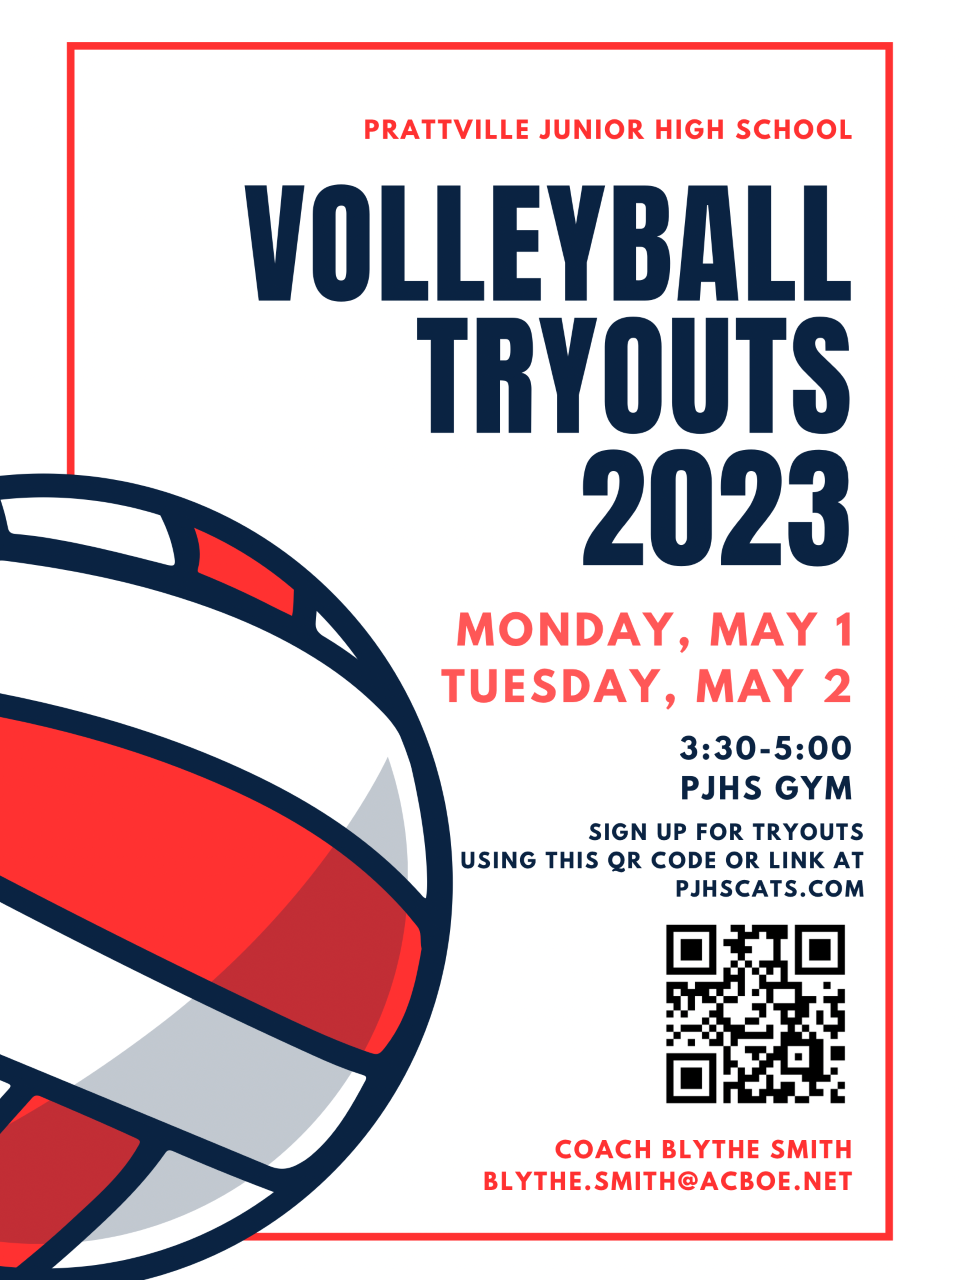 Parttville Jr high School Volleyball tryouts 2023 Monday May1st Tuesday May 2nd 3:30-5:00 PJHS GYM Sign up for tryouts using this QR code or link at pjhscats,com Coach Blythe Smith blythe.smith@acboe.net